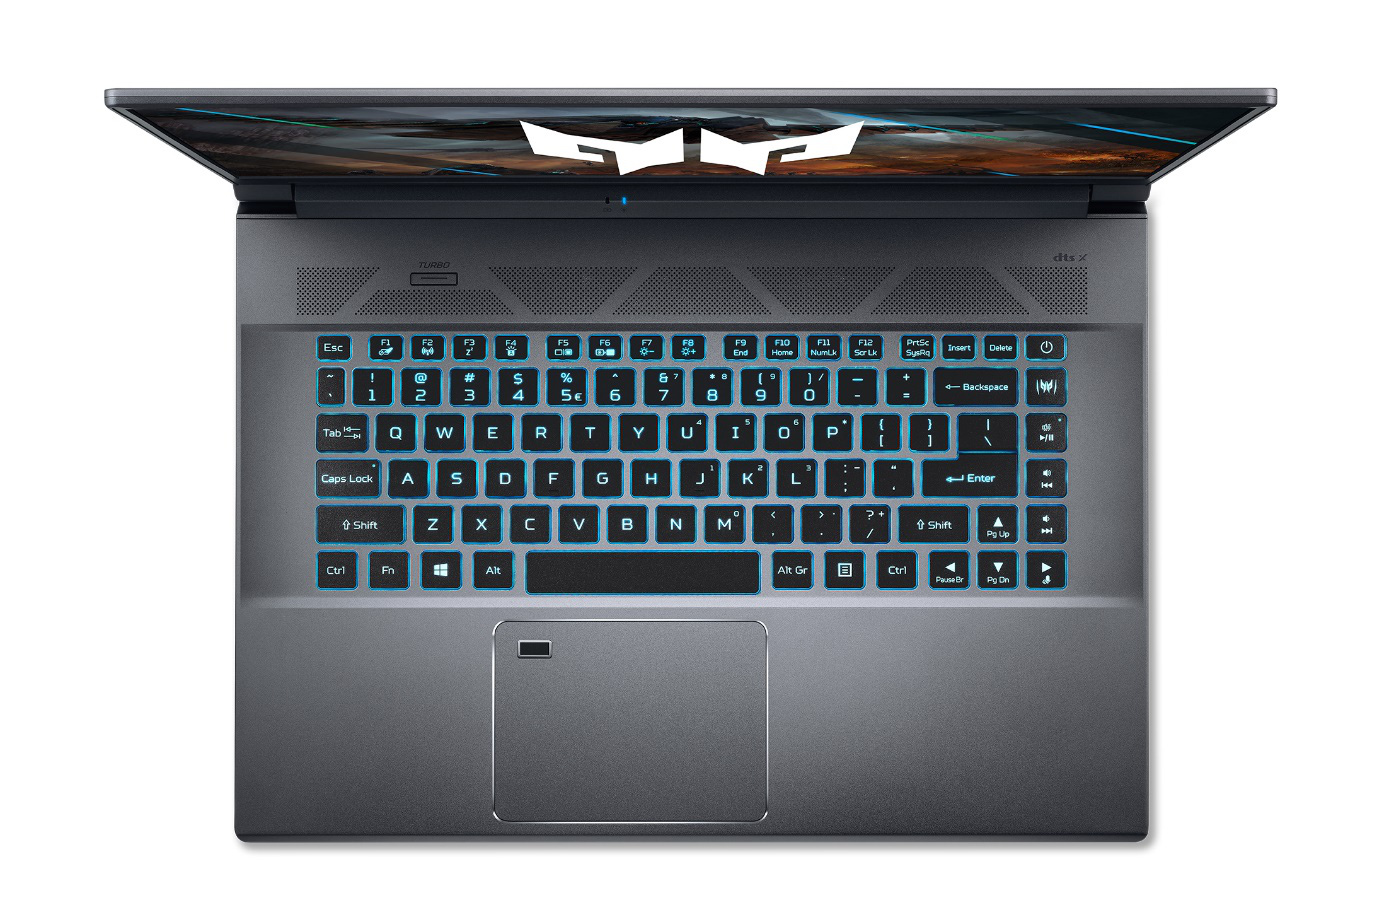 Acer Predator Triton 500 SE - thin and light gaming laptop with super configuration - Photo 3.